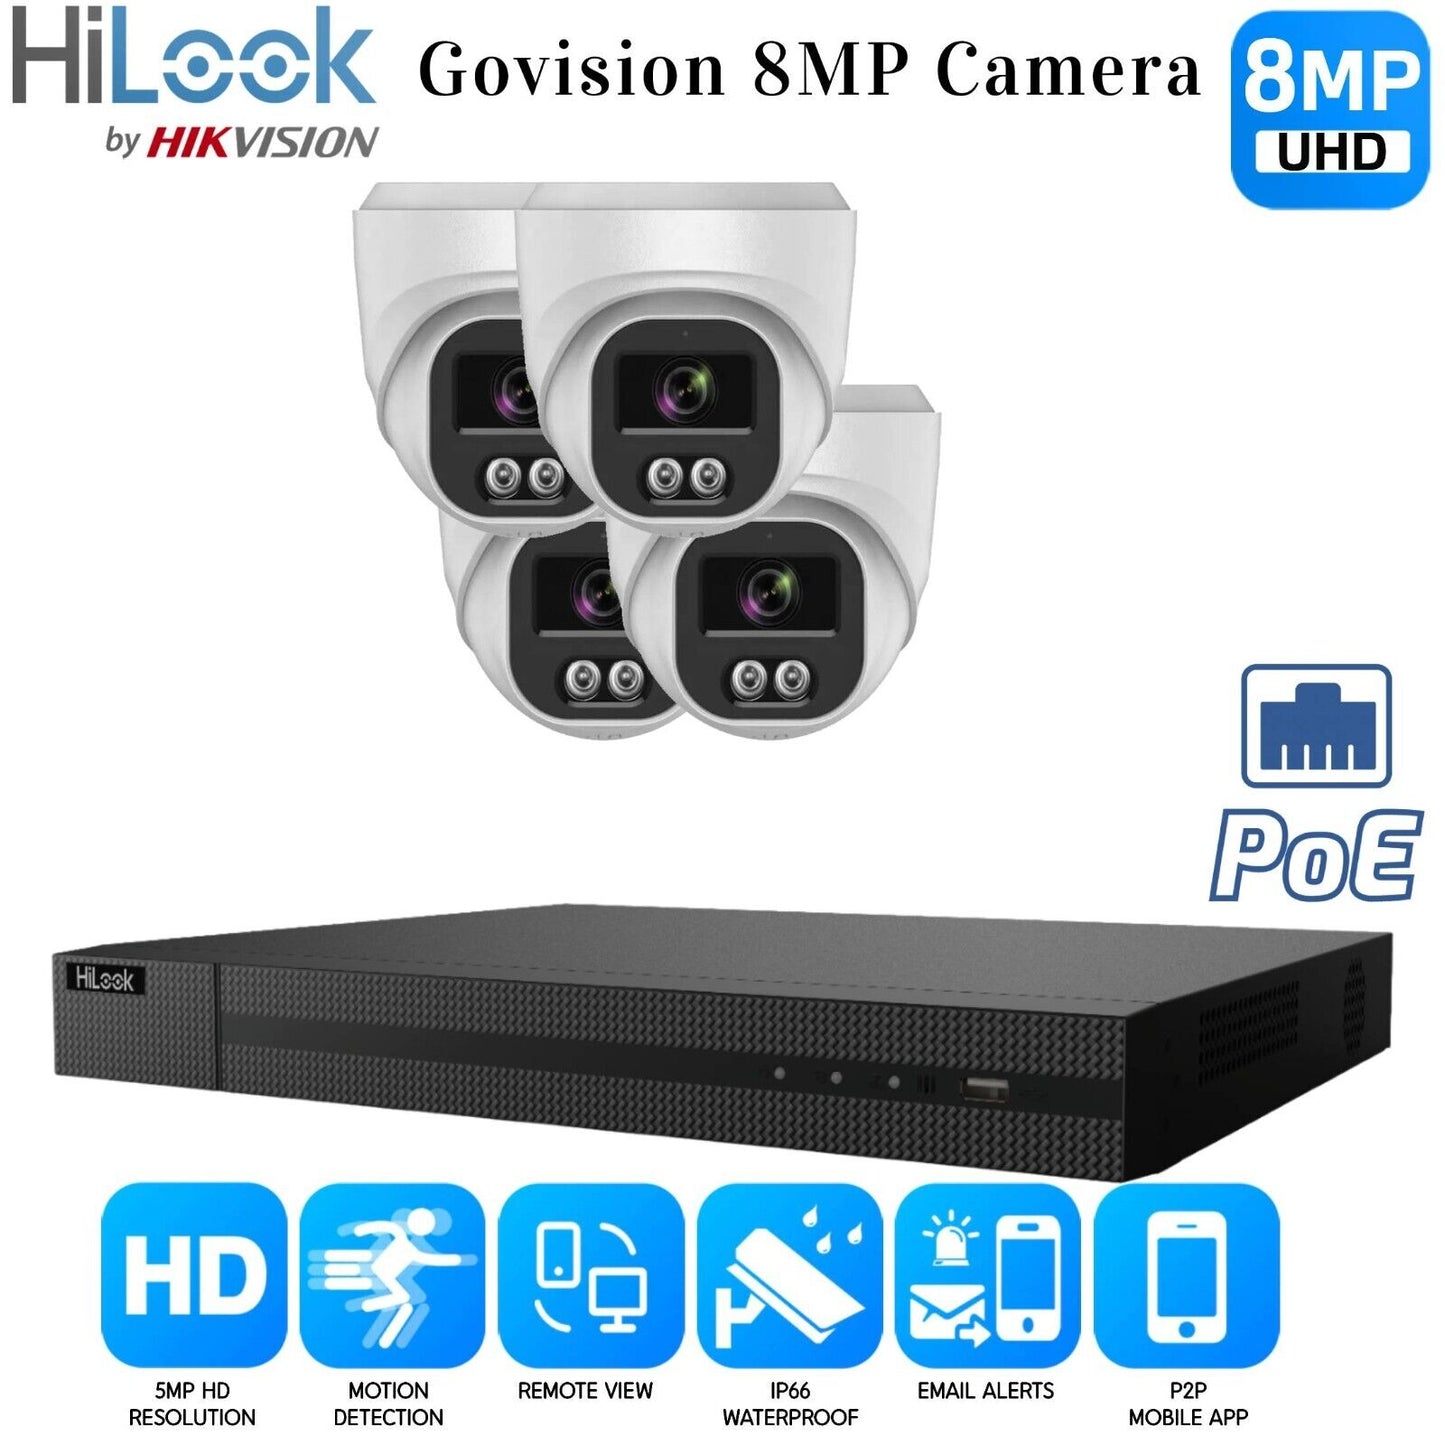 HIKVISION CCTV SYSTEM IP POE 8MP AUDIO MIC CAMERA SMART NIGHTVISION SECURITY KIT 4CH NVR 4x Cameras 4TB HDD